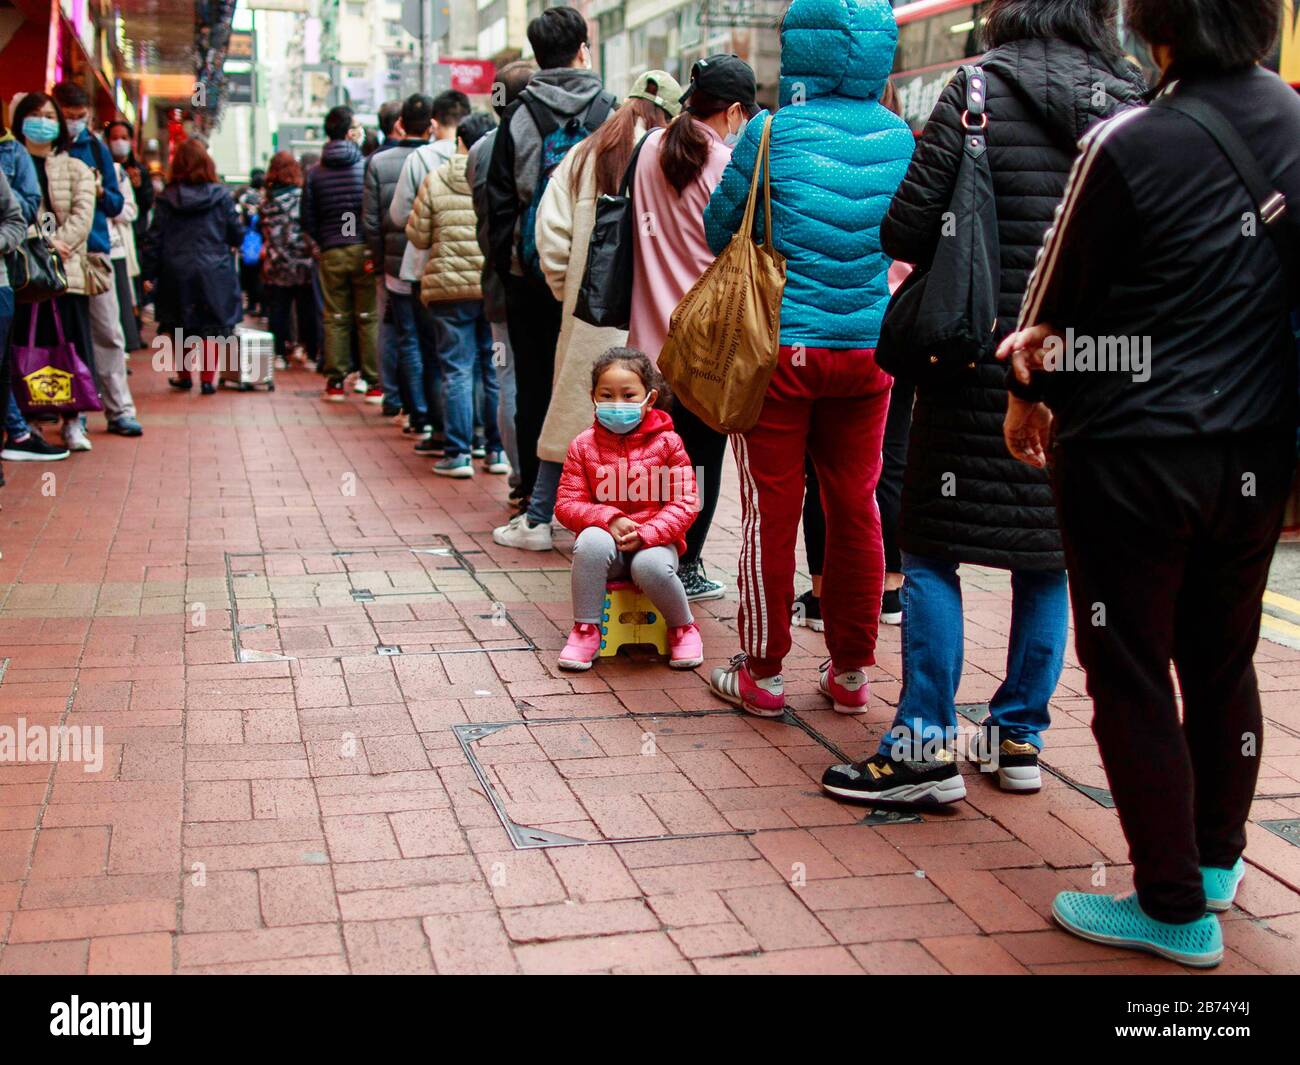 Hong Kongers line up to buy surgical masks in Hong Kong. The first person in the line said he started to line up at 3 am in the morning. A thirty-nine year old man in Hong Kong believed to have been the first victim of the Coronavirus. Stock Photo